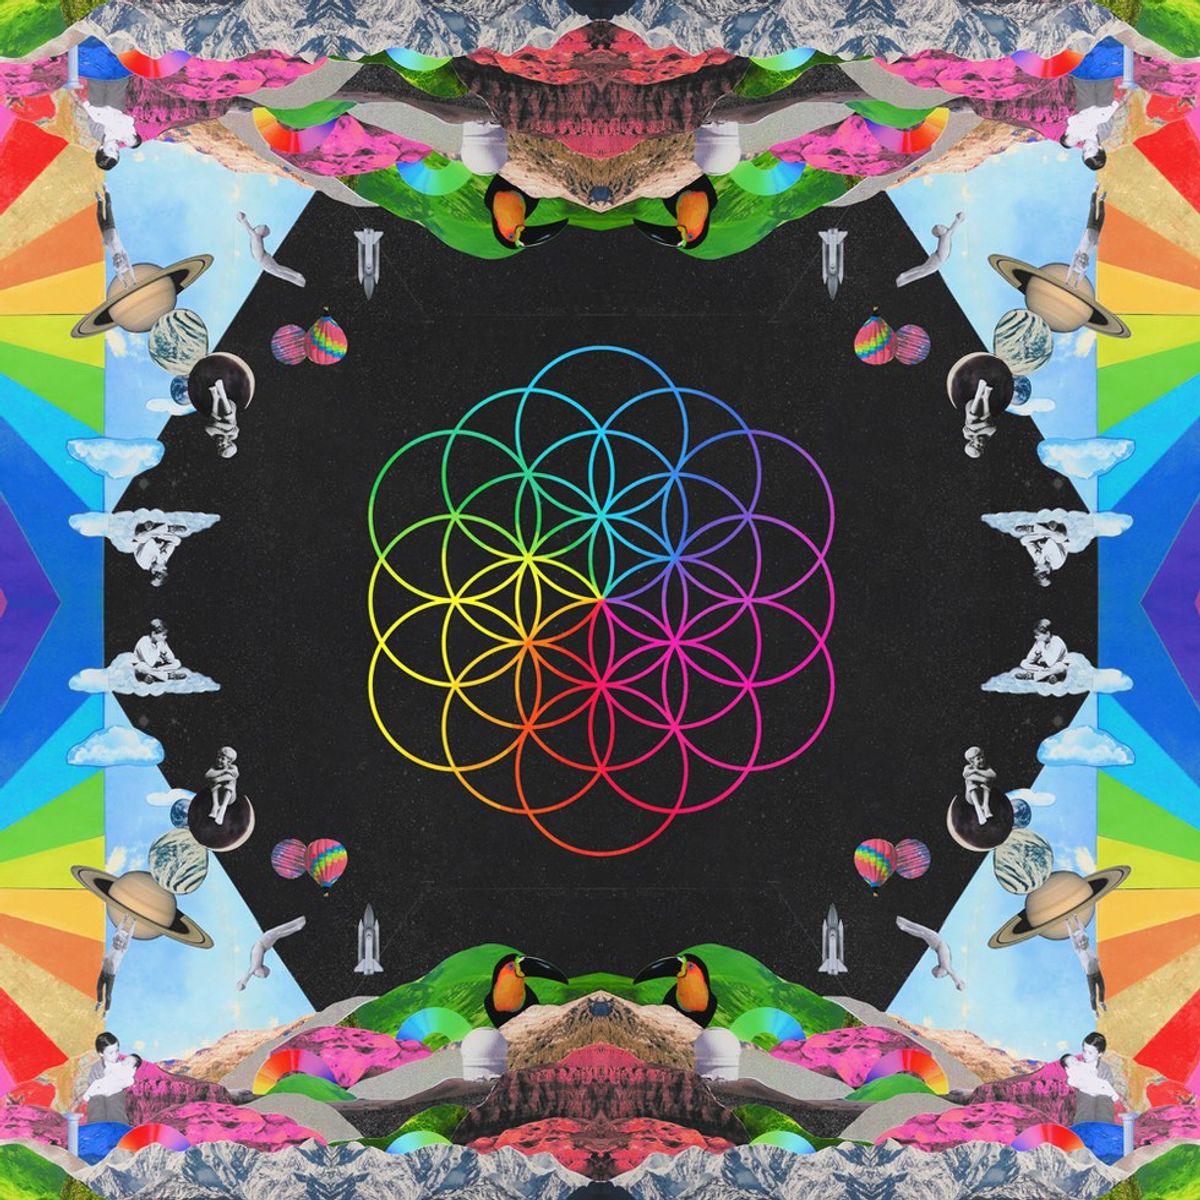 'A Head Full Of Dreams' And Coldplay CDs